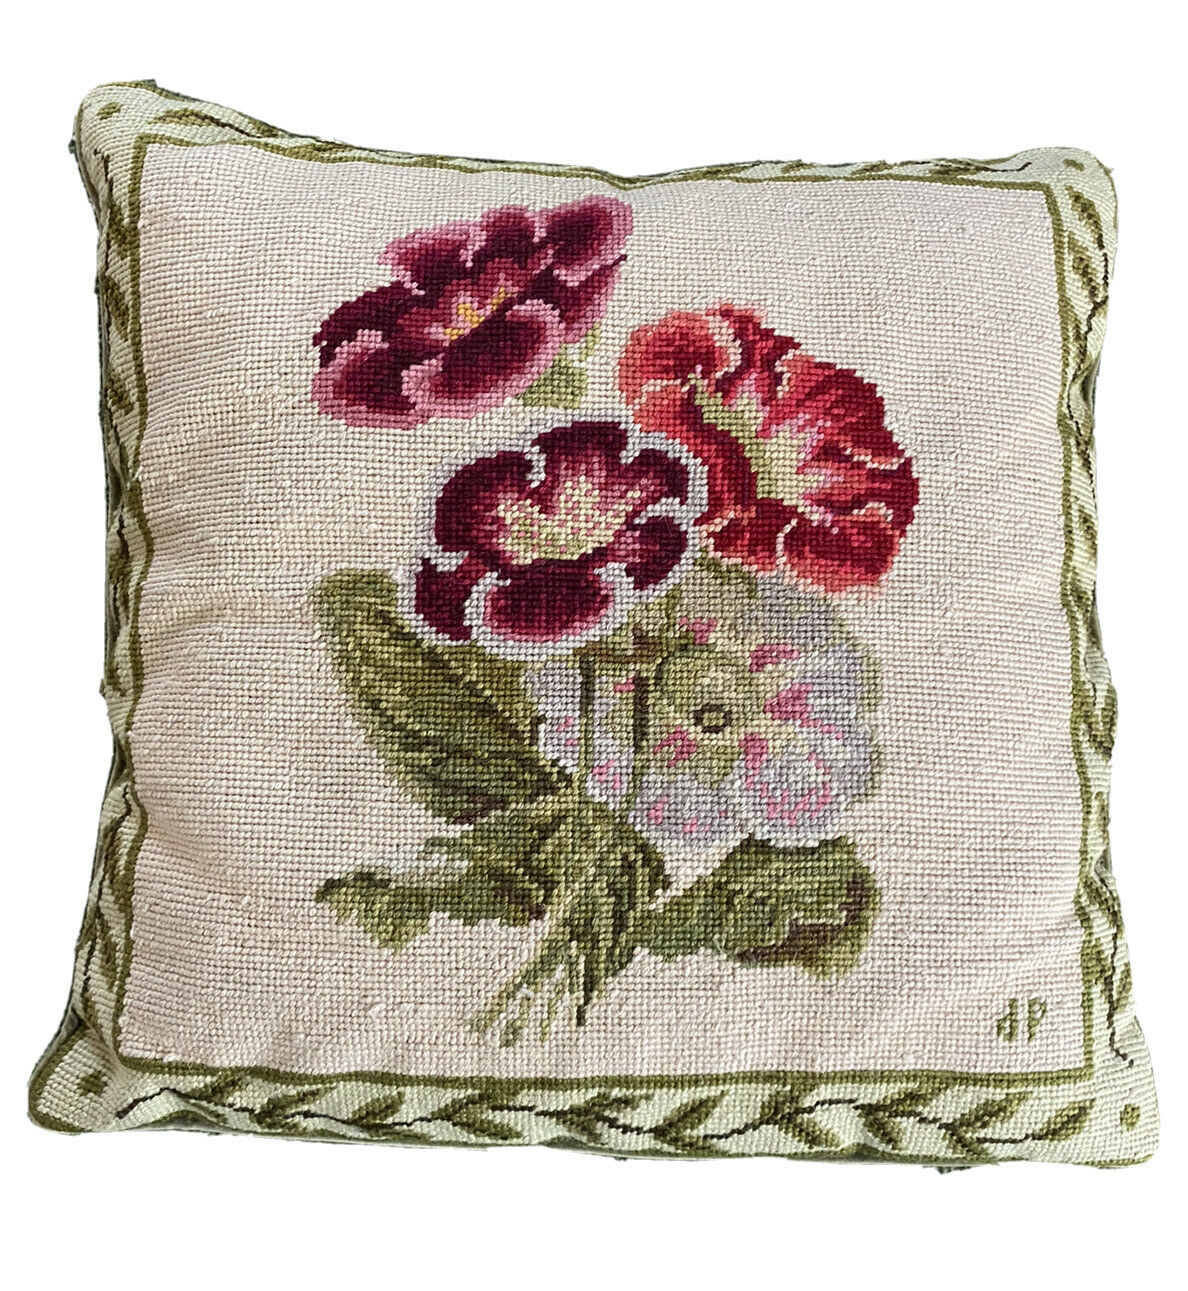 Vintage 17x17" Square Floral Needlepoint Feather Pillow Initialed Artisan